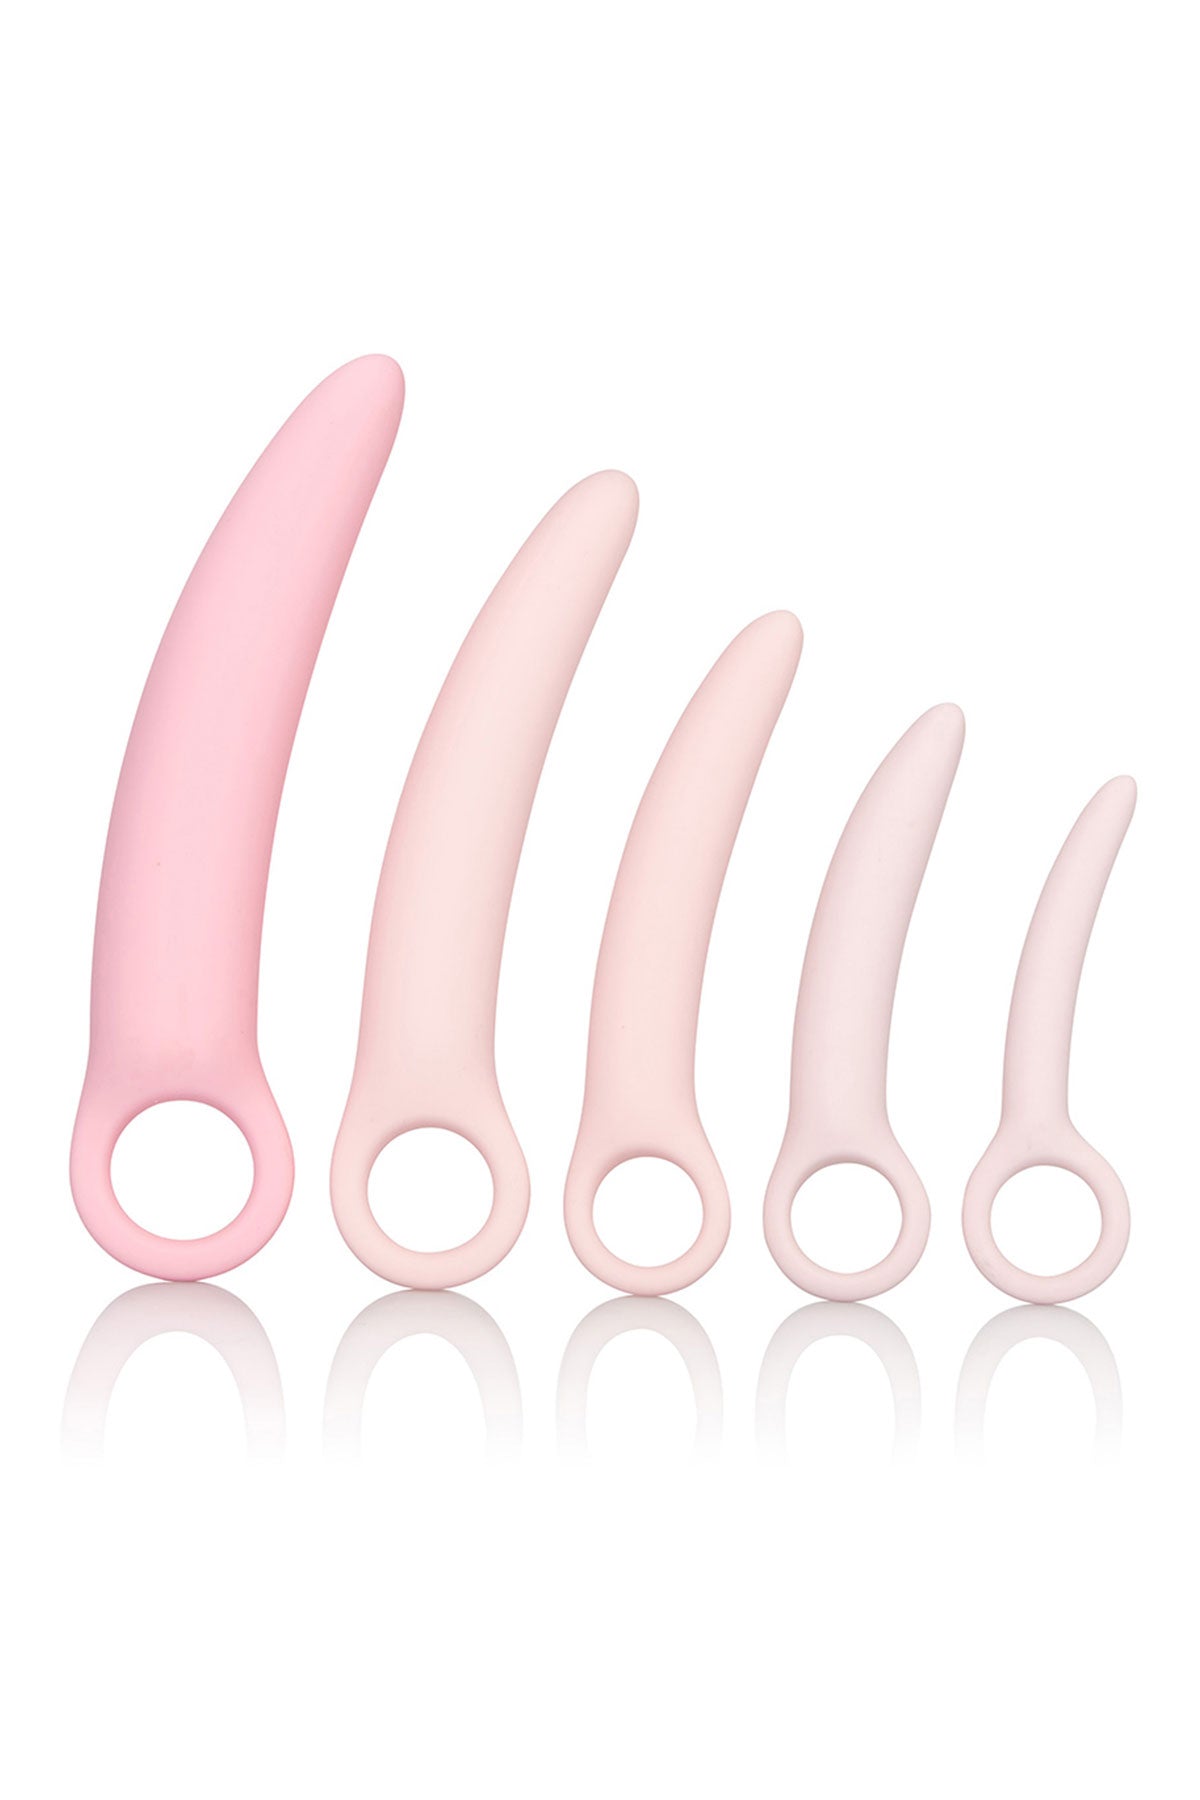 Silicone Dilator Kit by Inspire